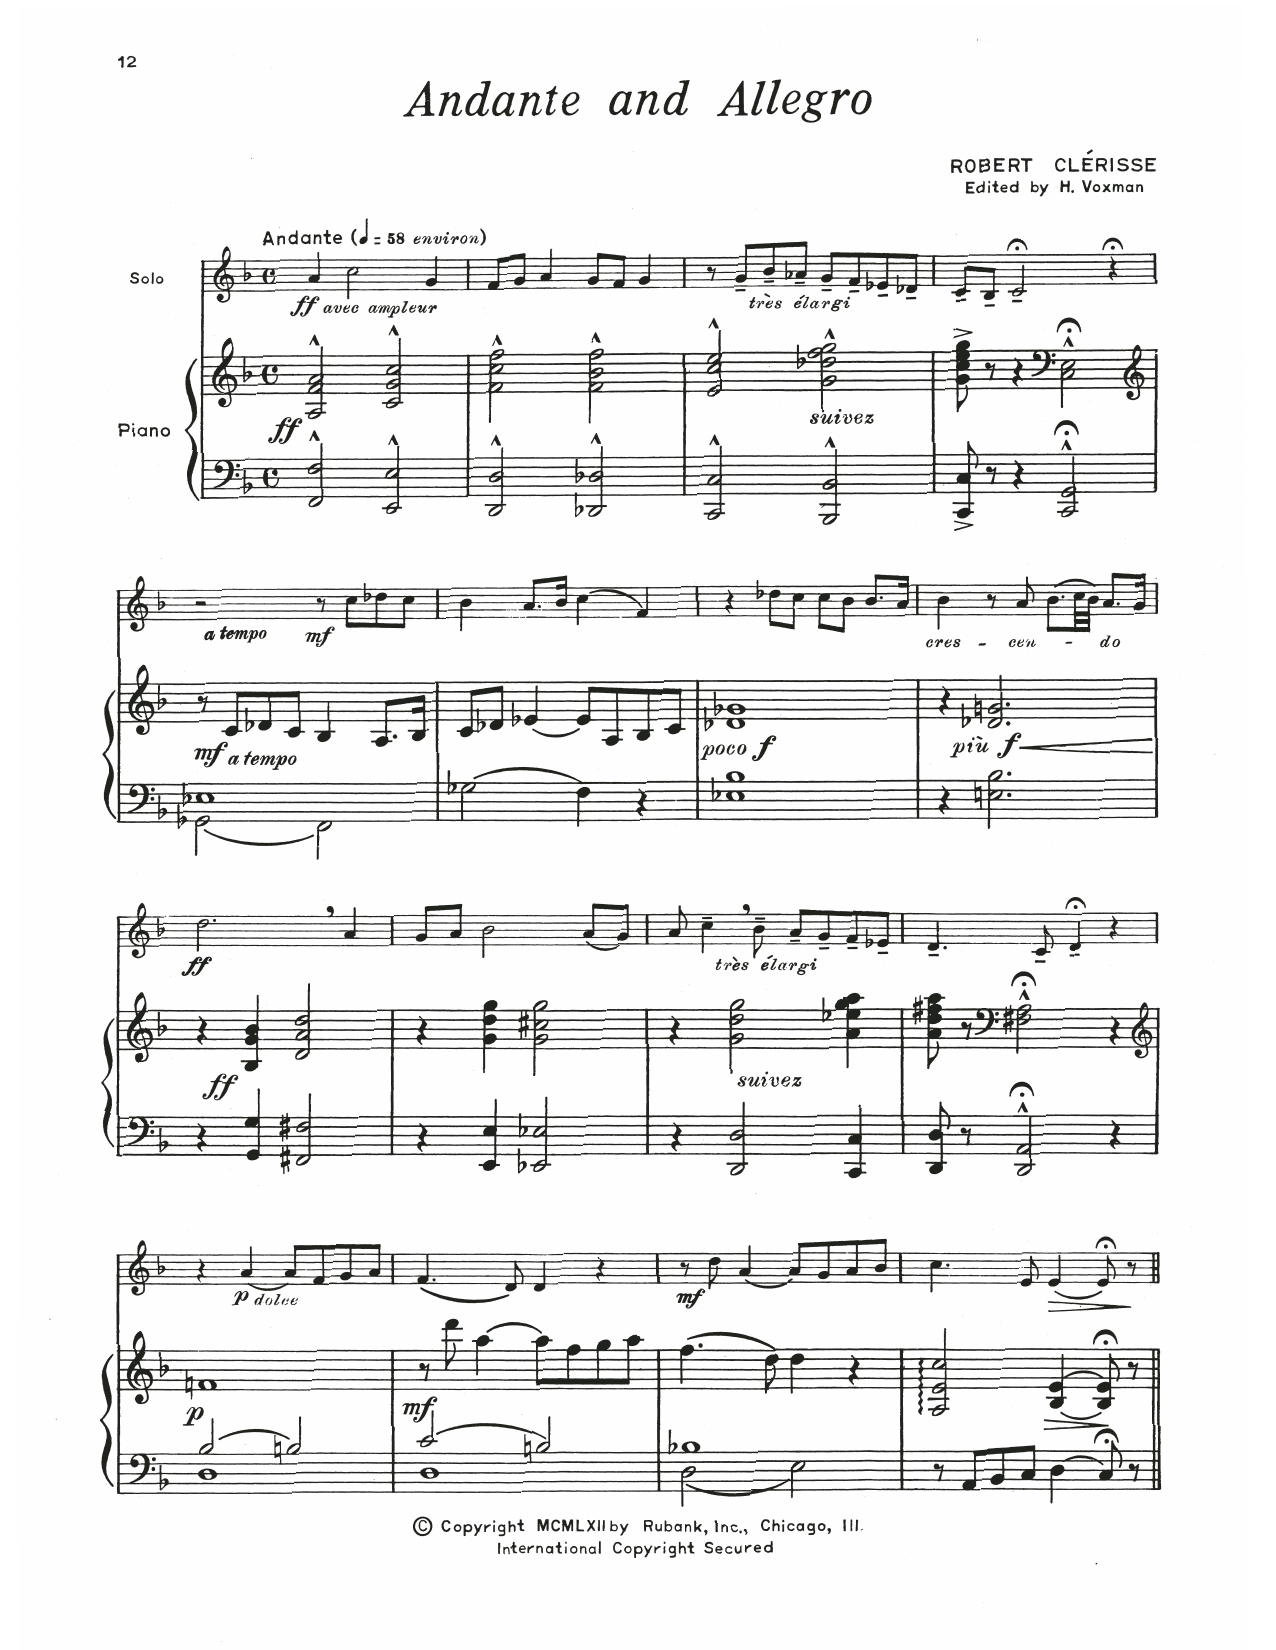 Download H. Voxman Andante And Allegro Sheet Music